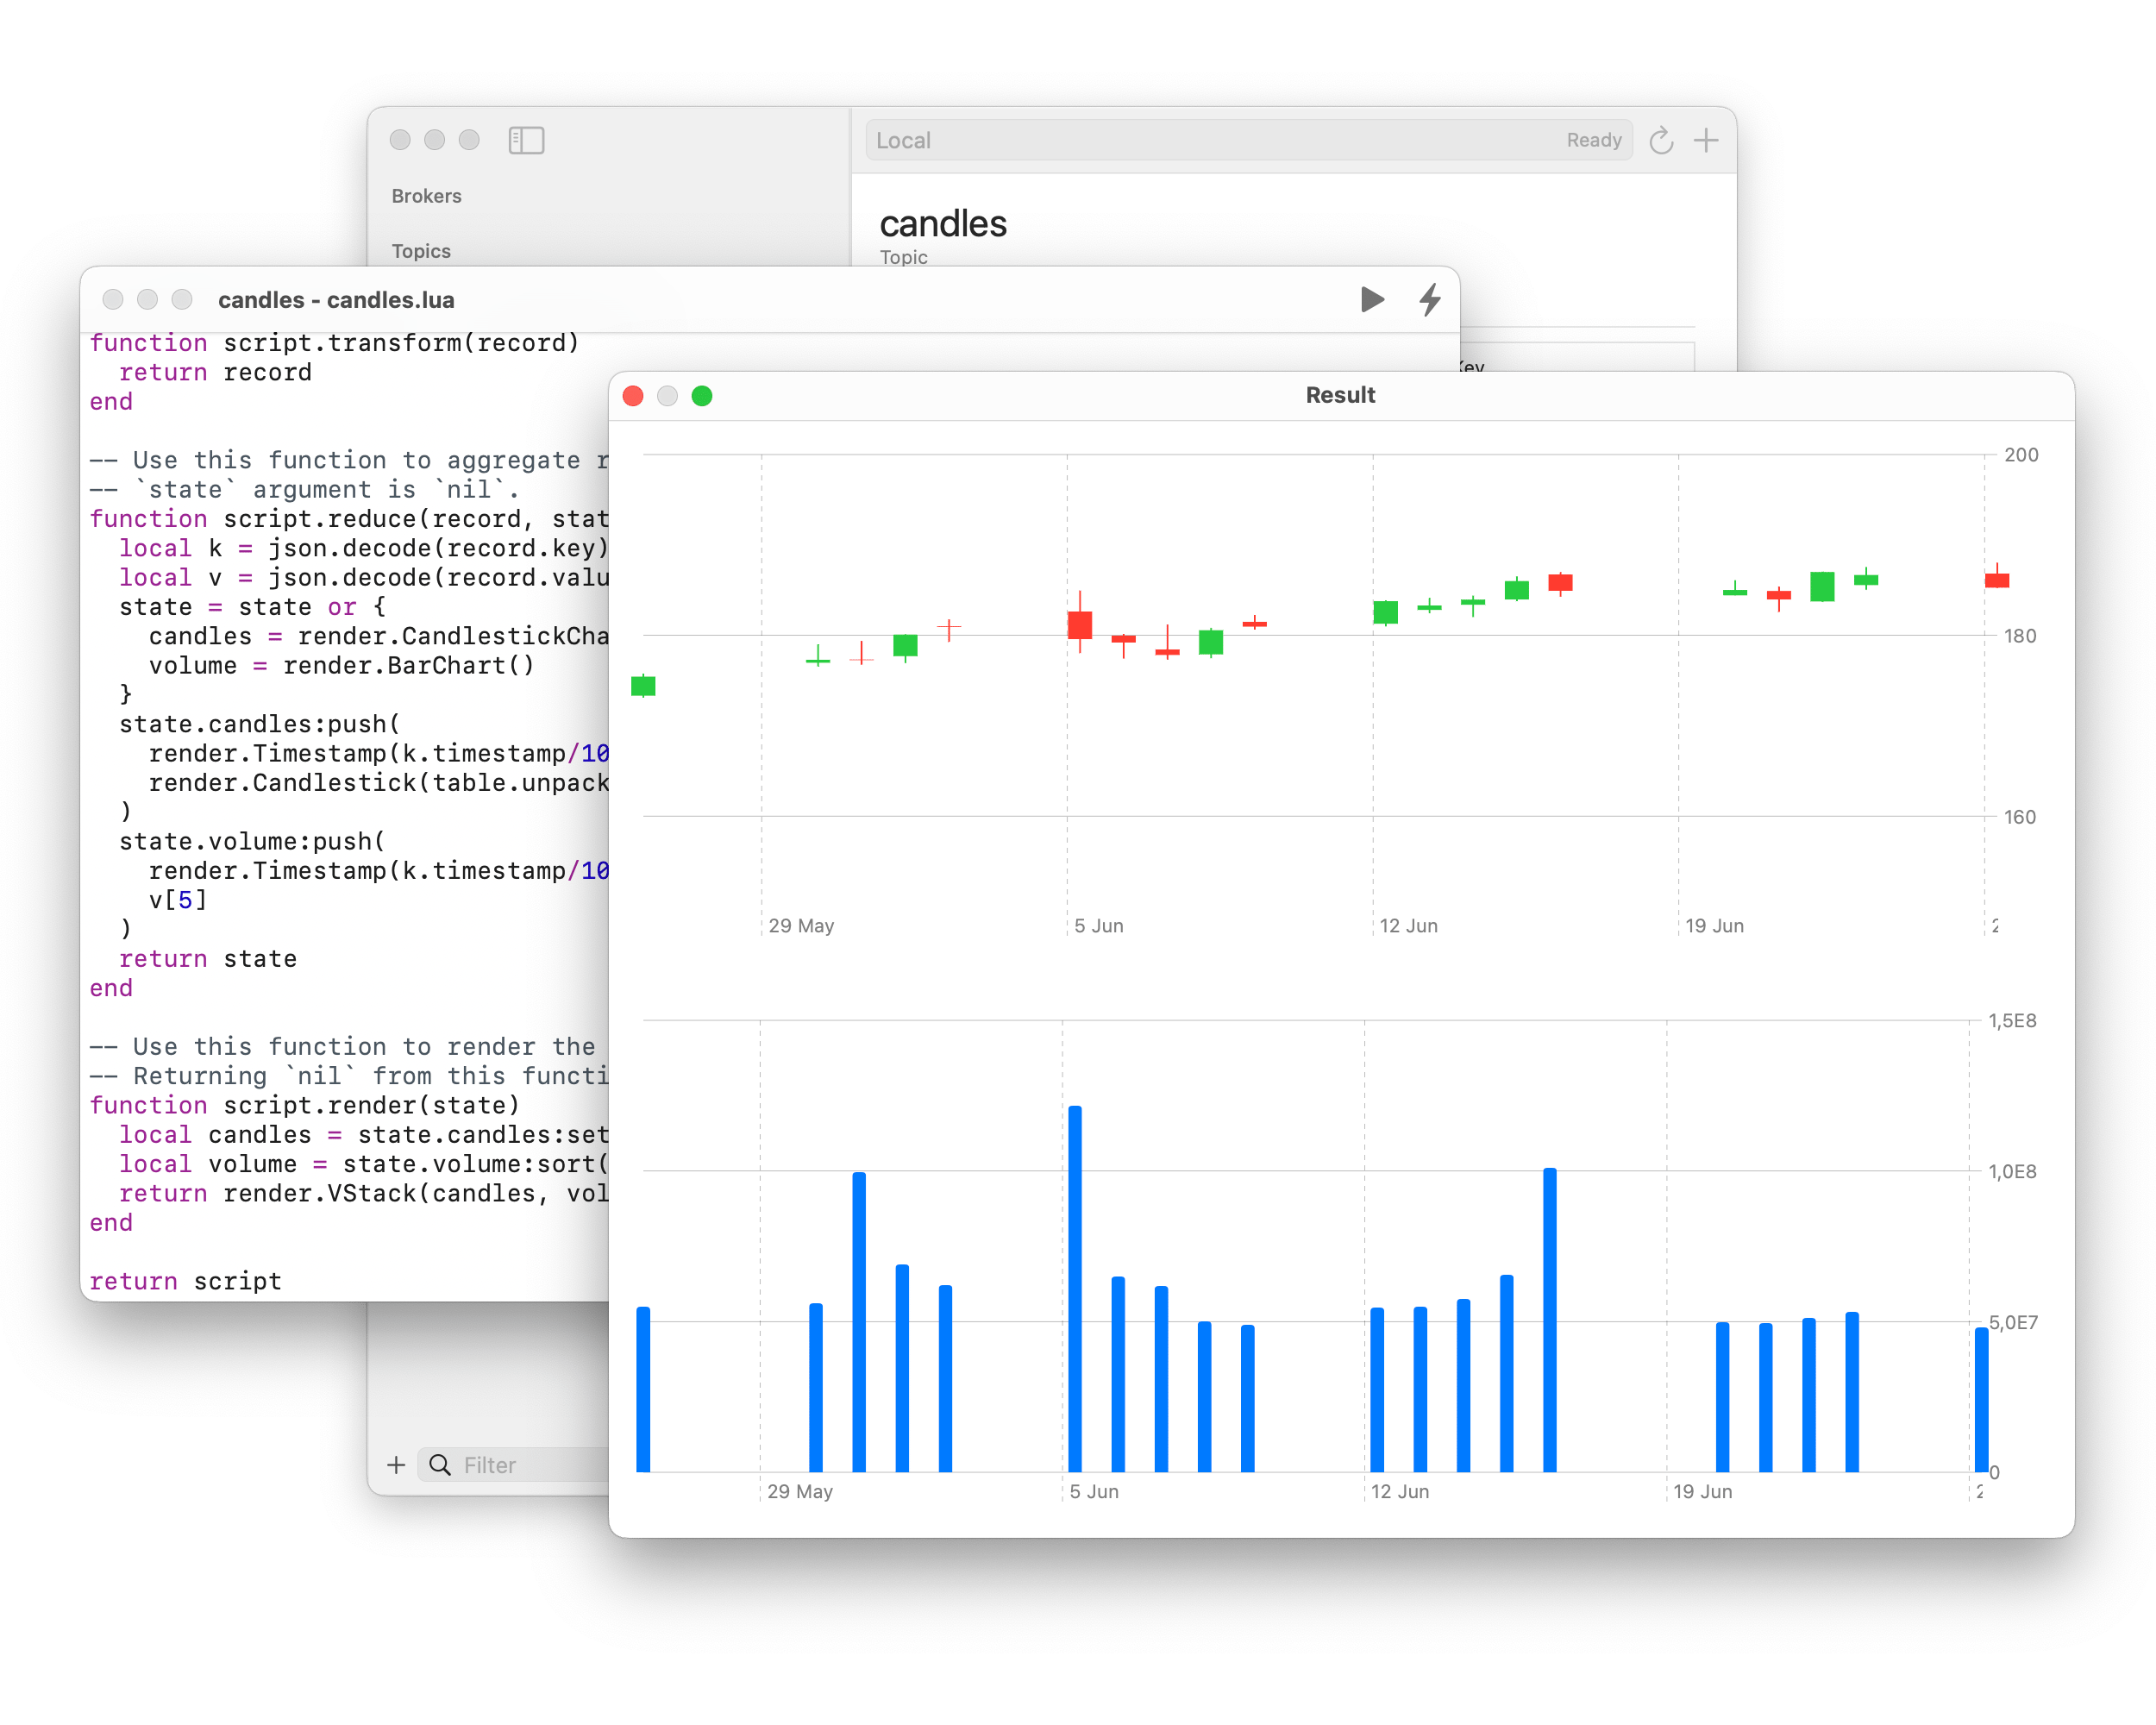 a screenshot of candlestick graphs visualizing financial candle data on a topic